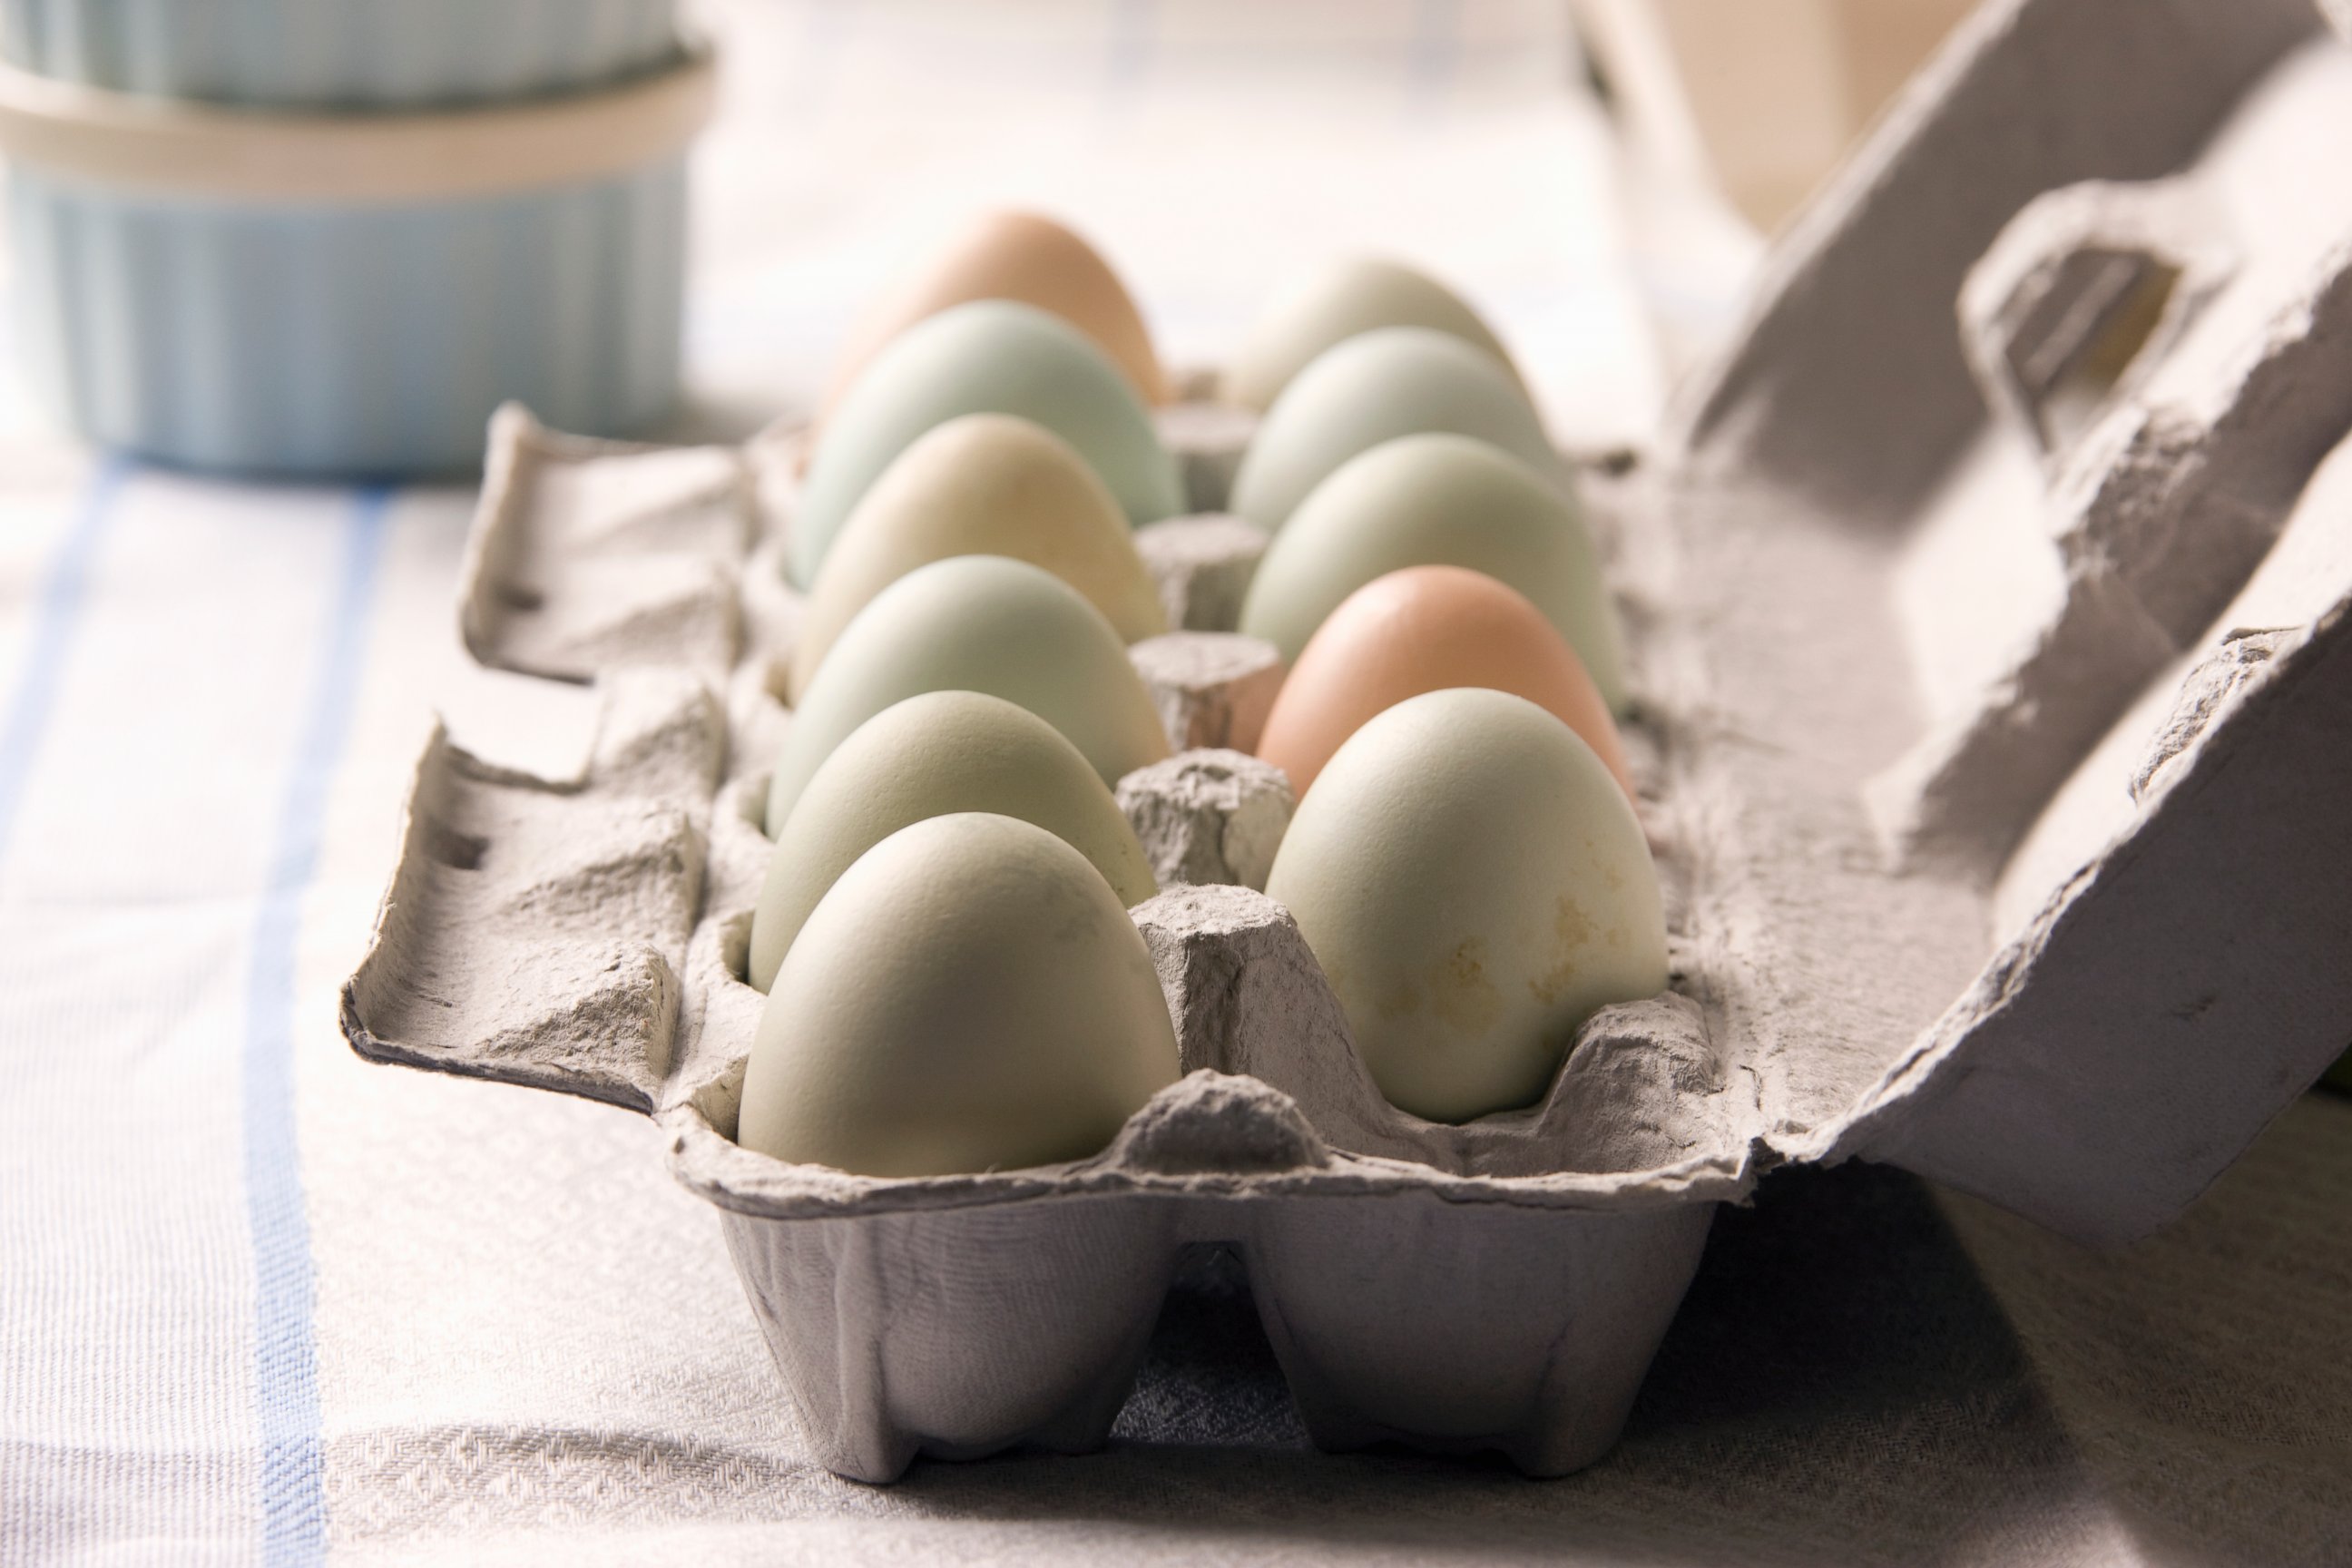 PHOTO: Eggs in a carton on a table in this undated photo.